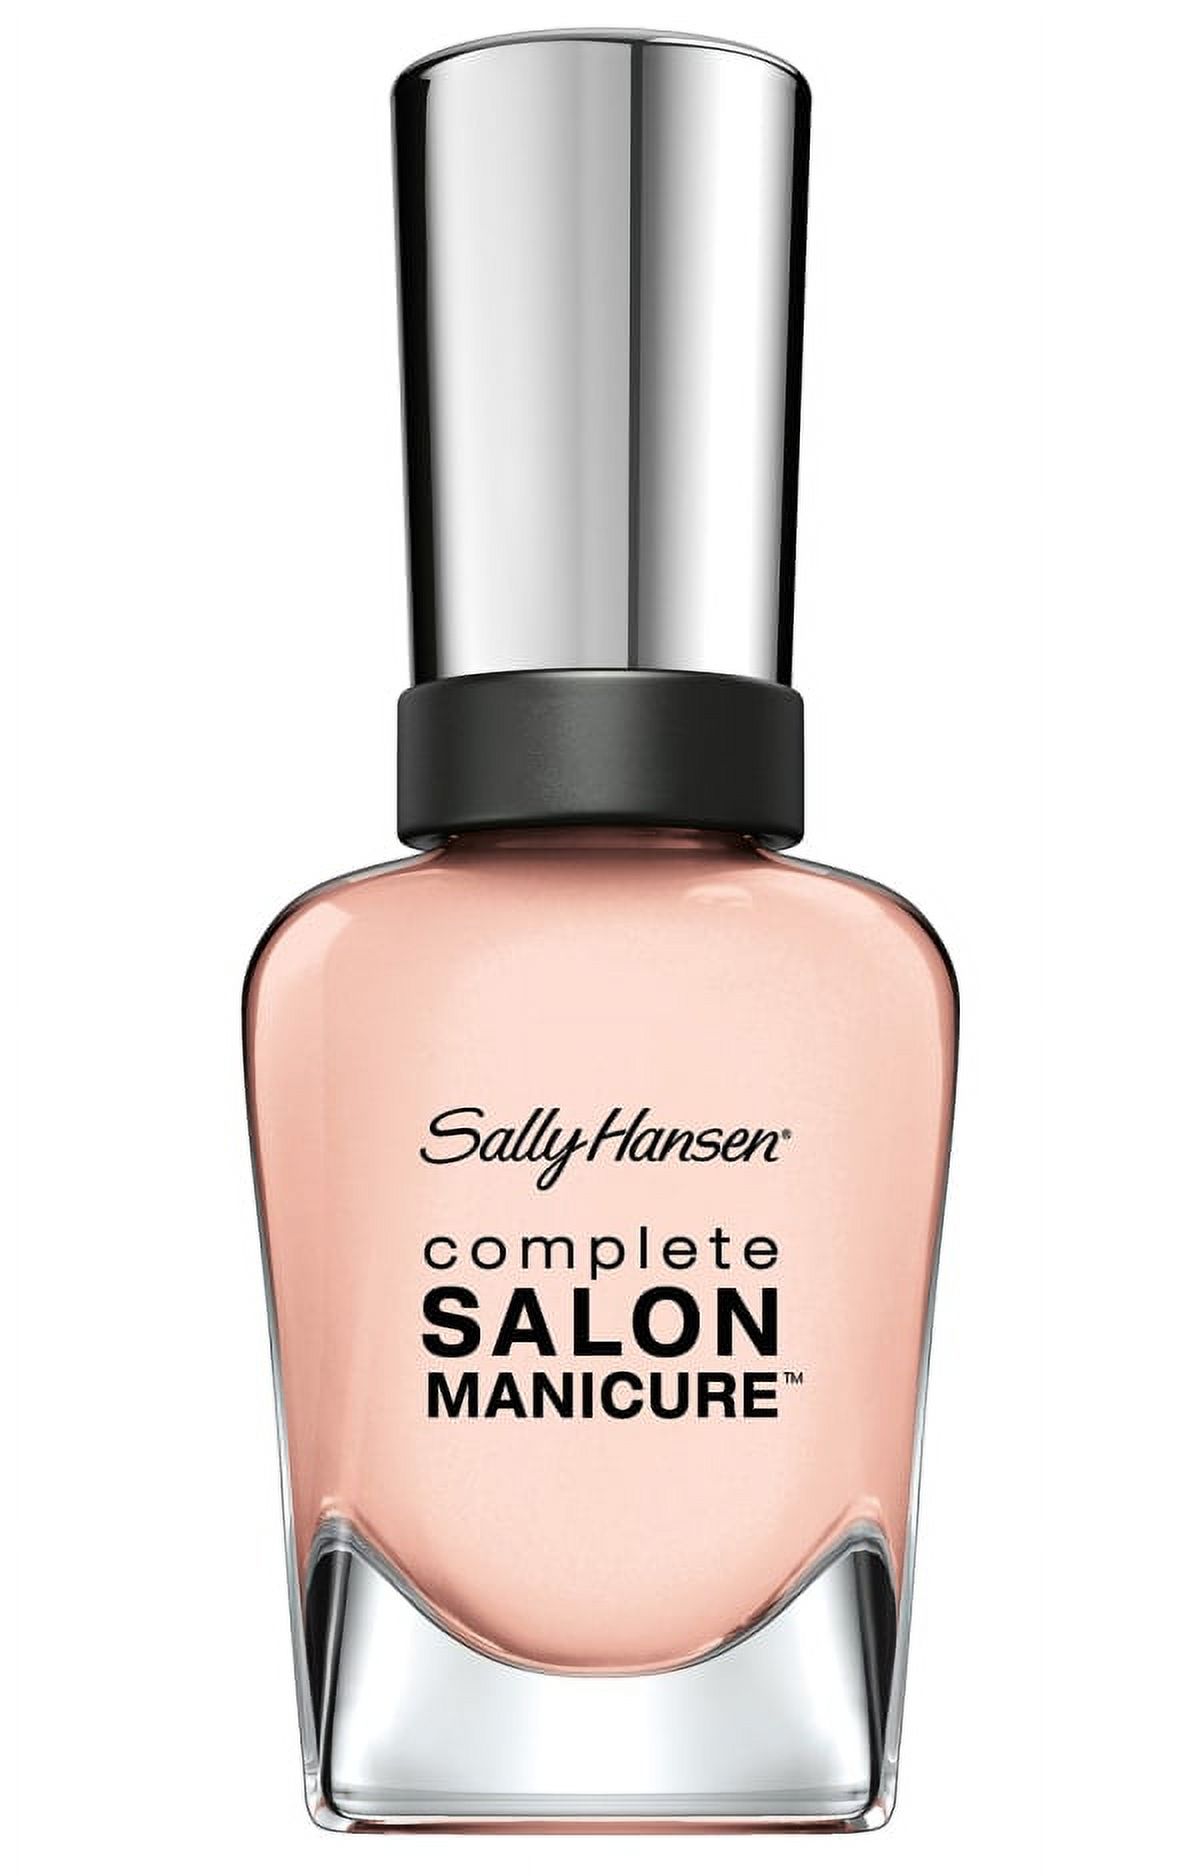 Sally Hansen Complete Salon Manicure Nail Polish, Arm Candy - image 1 of 3